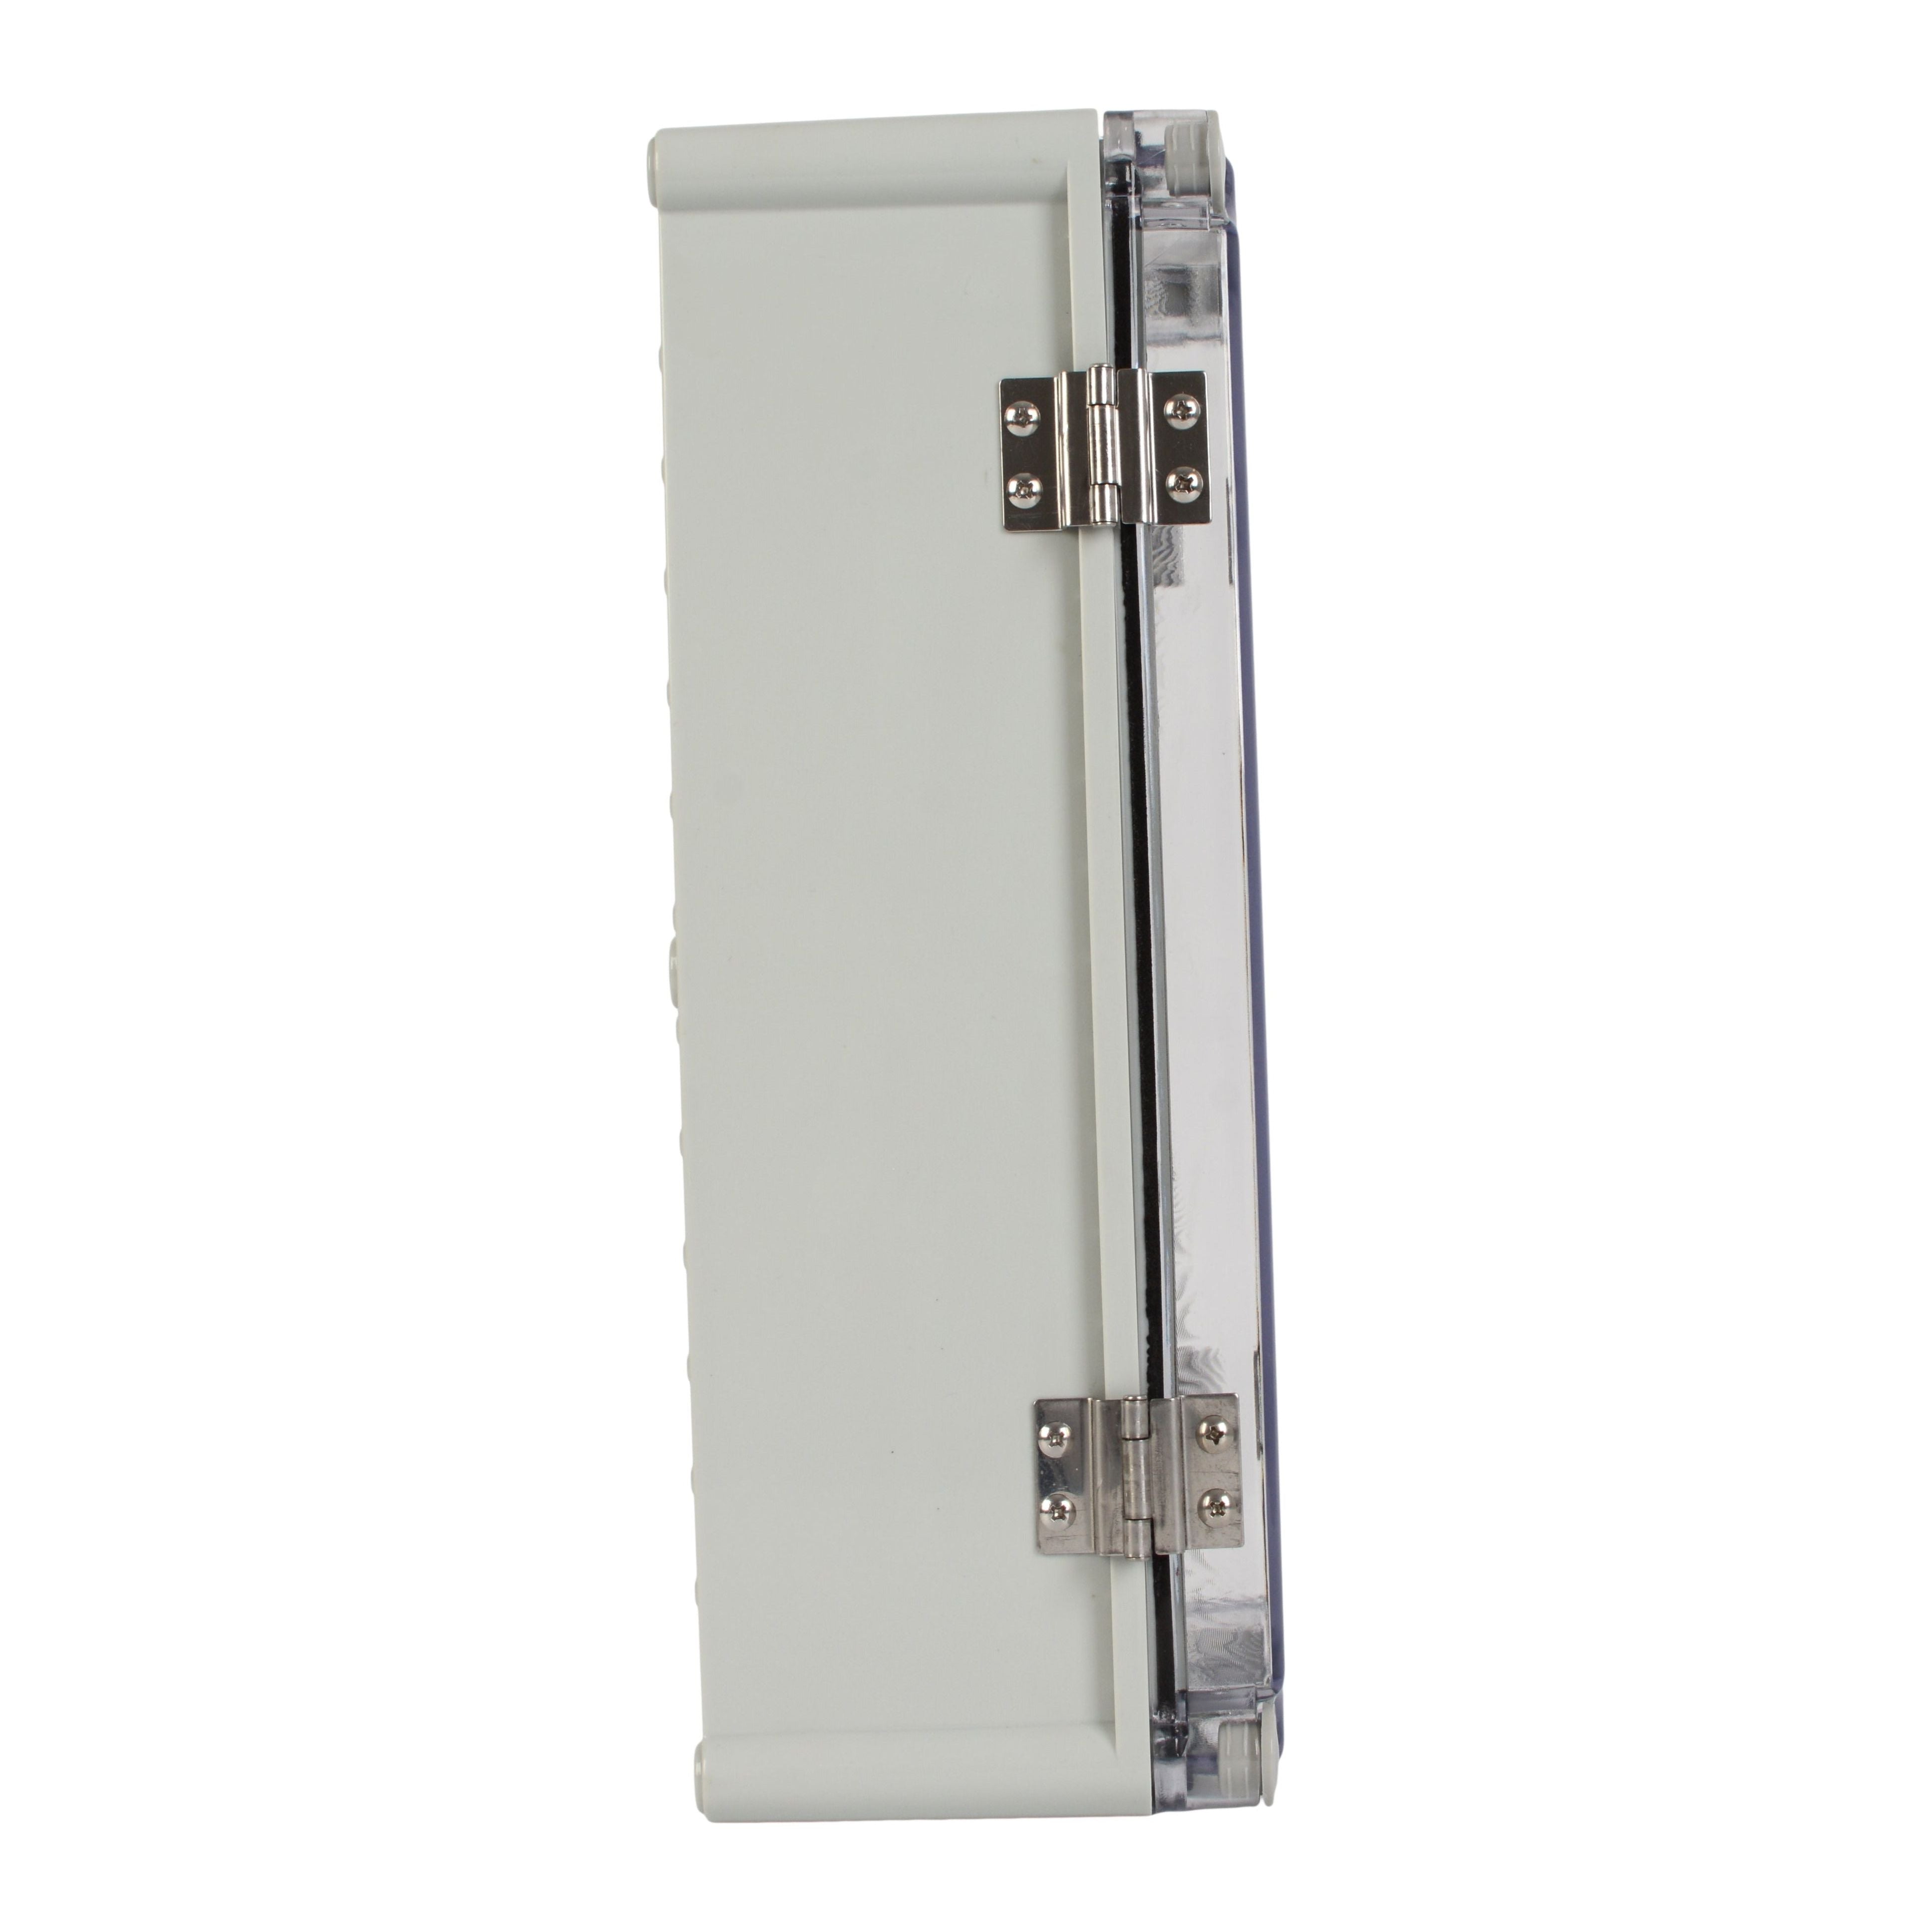 ABS IP66 Clear Lid Hinge Junction Box 380 x 190 x 130mm